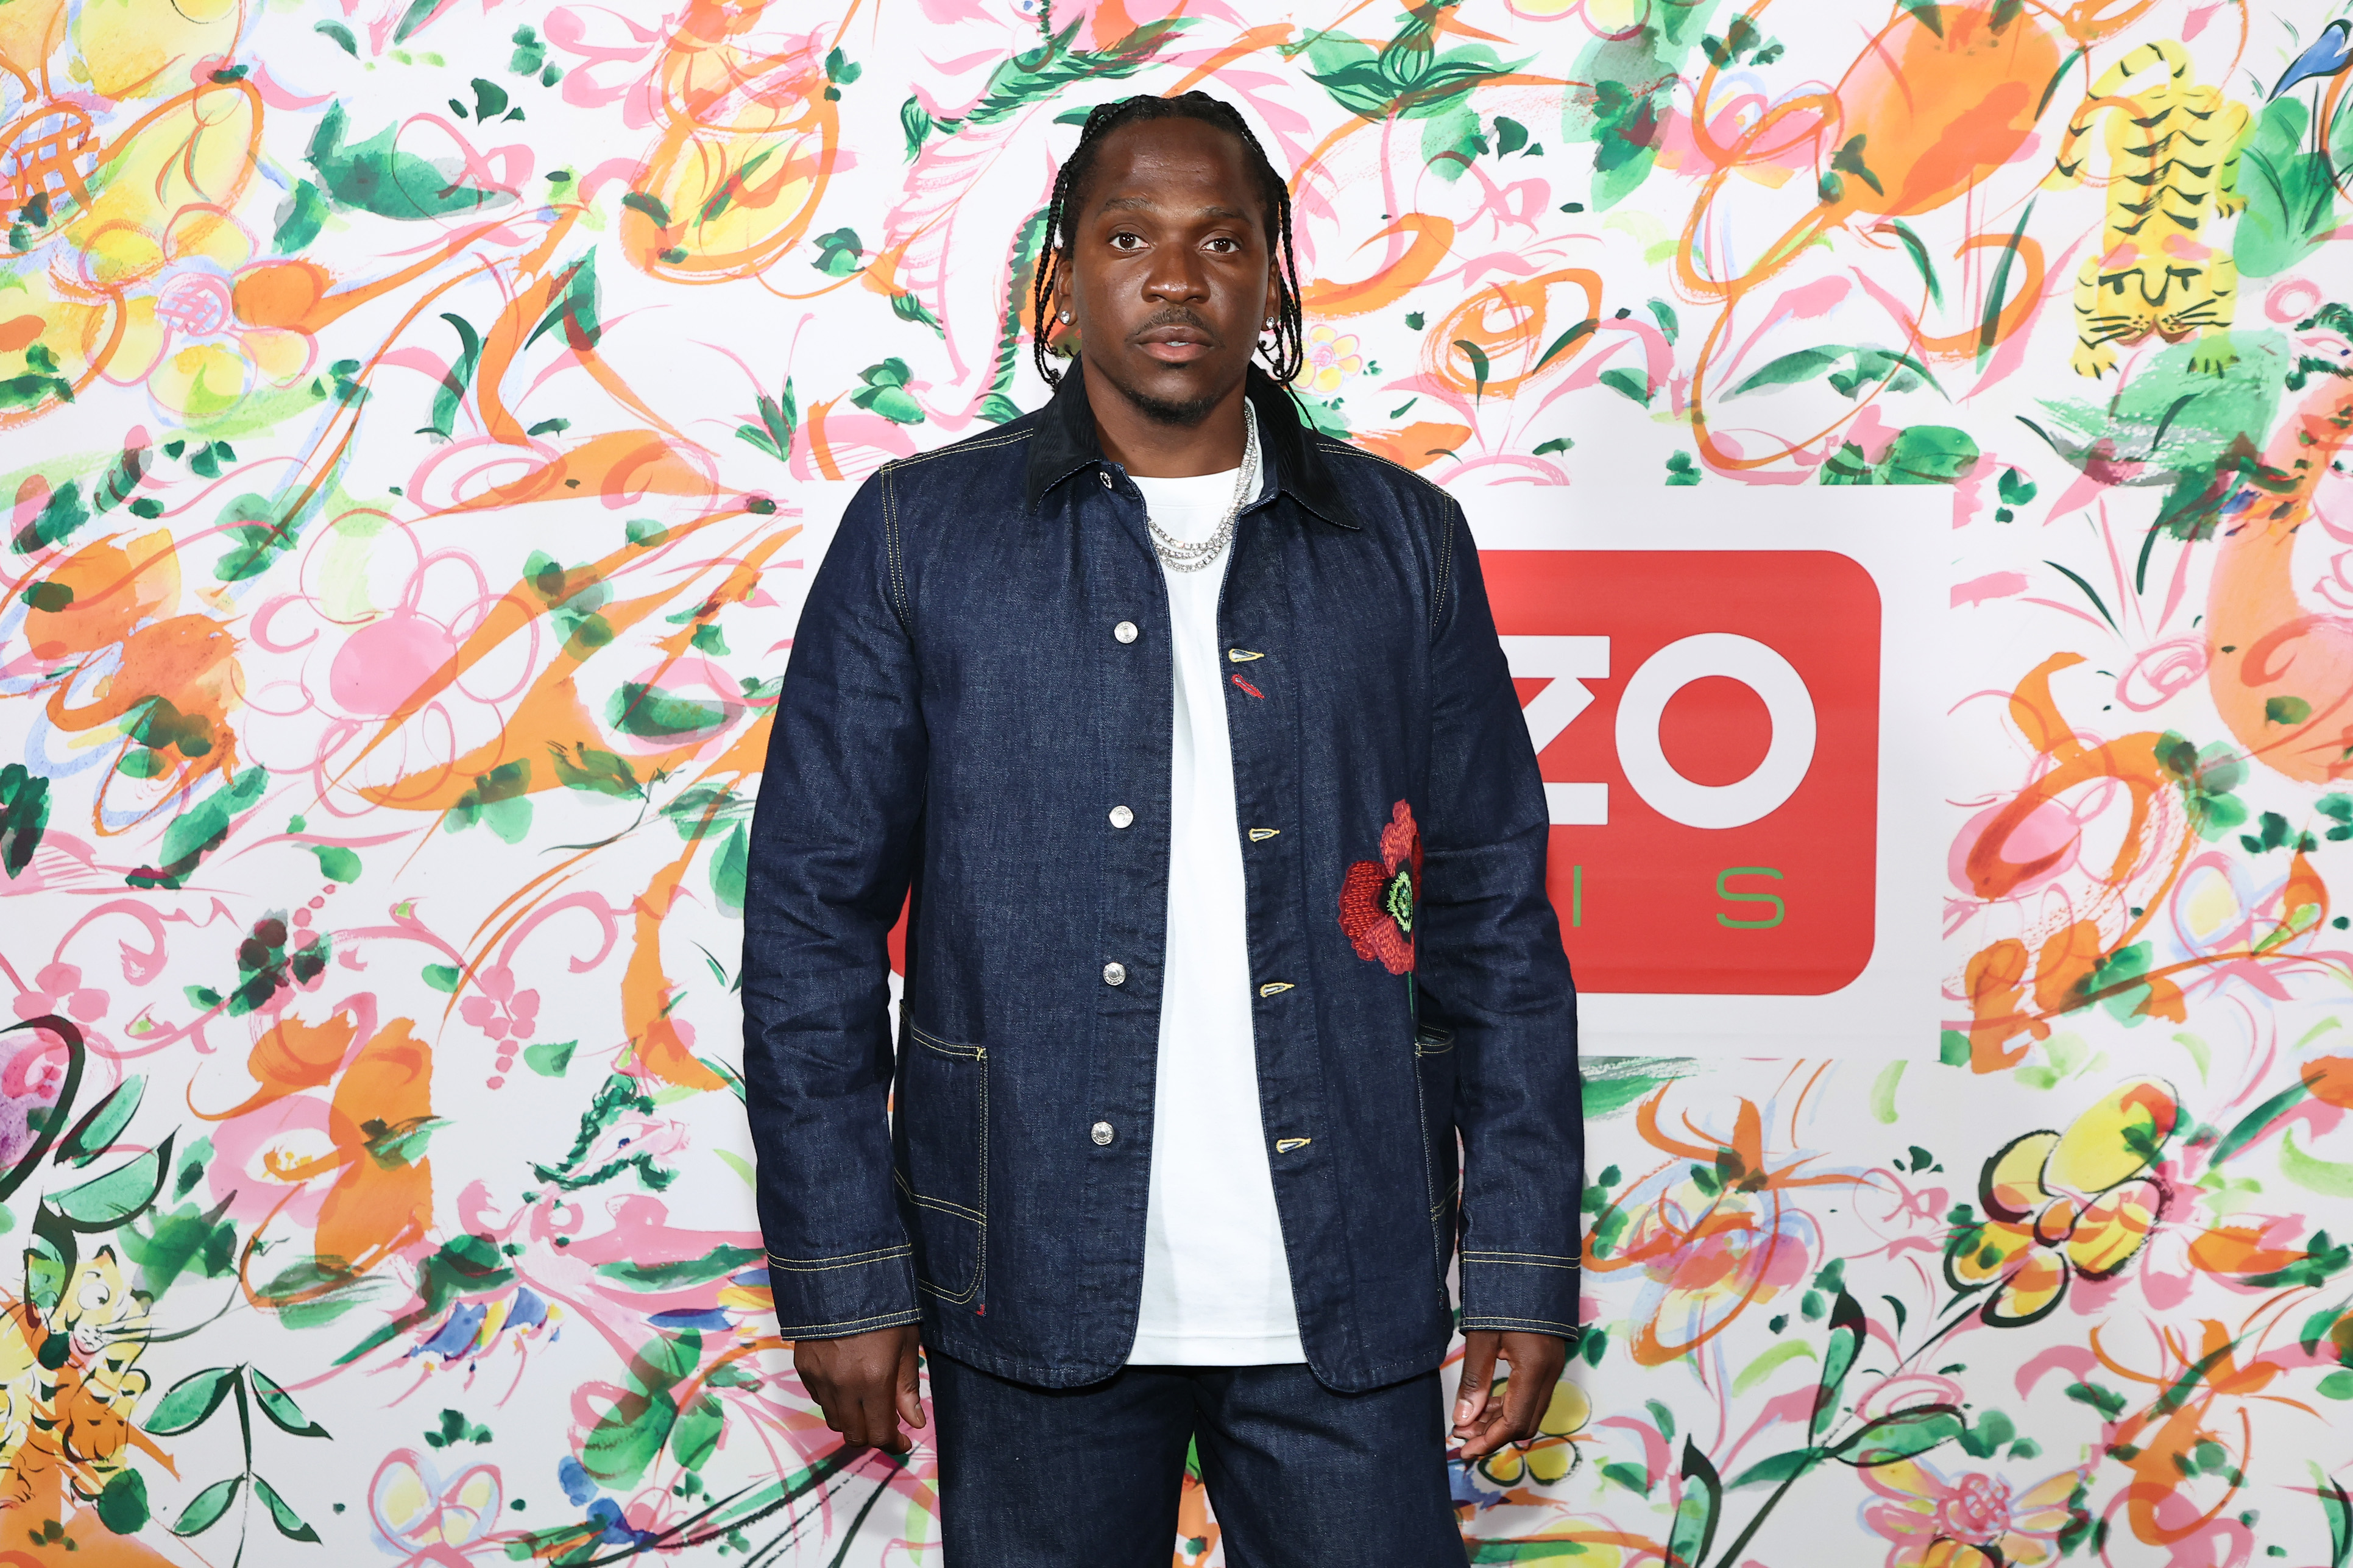 Pusha T Fan Lost His Prosthetic Leg At His Show, Push Responds: “We Gotta Find That”